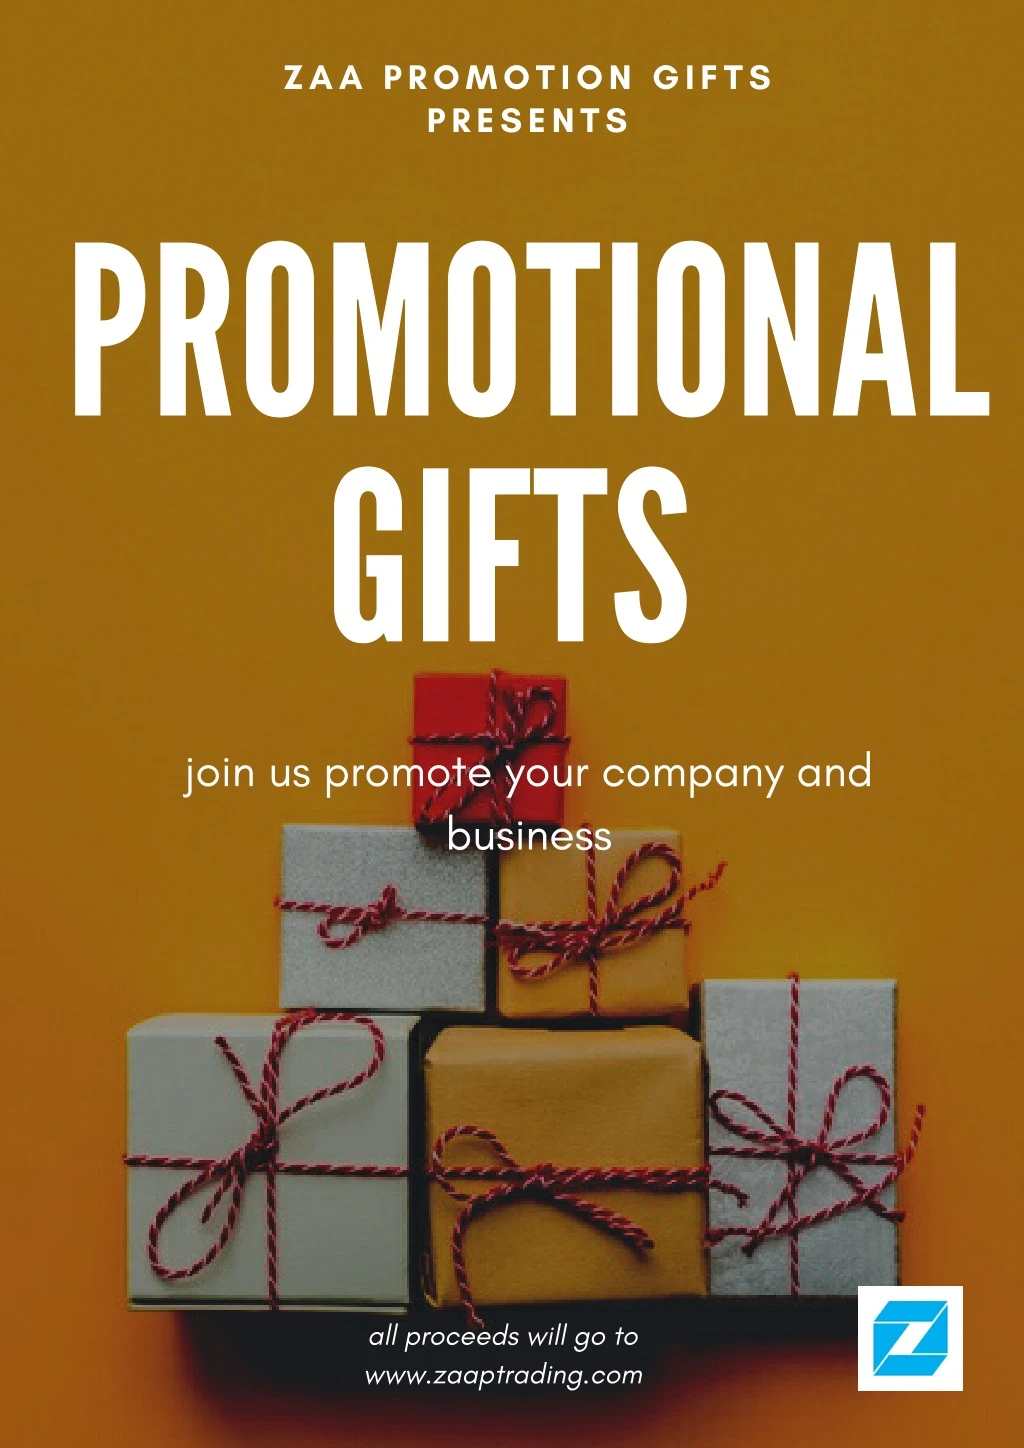 zaa promotion gifts presents promotion a l gifts